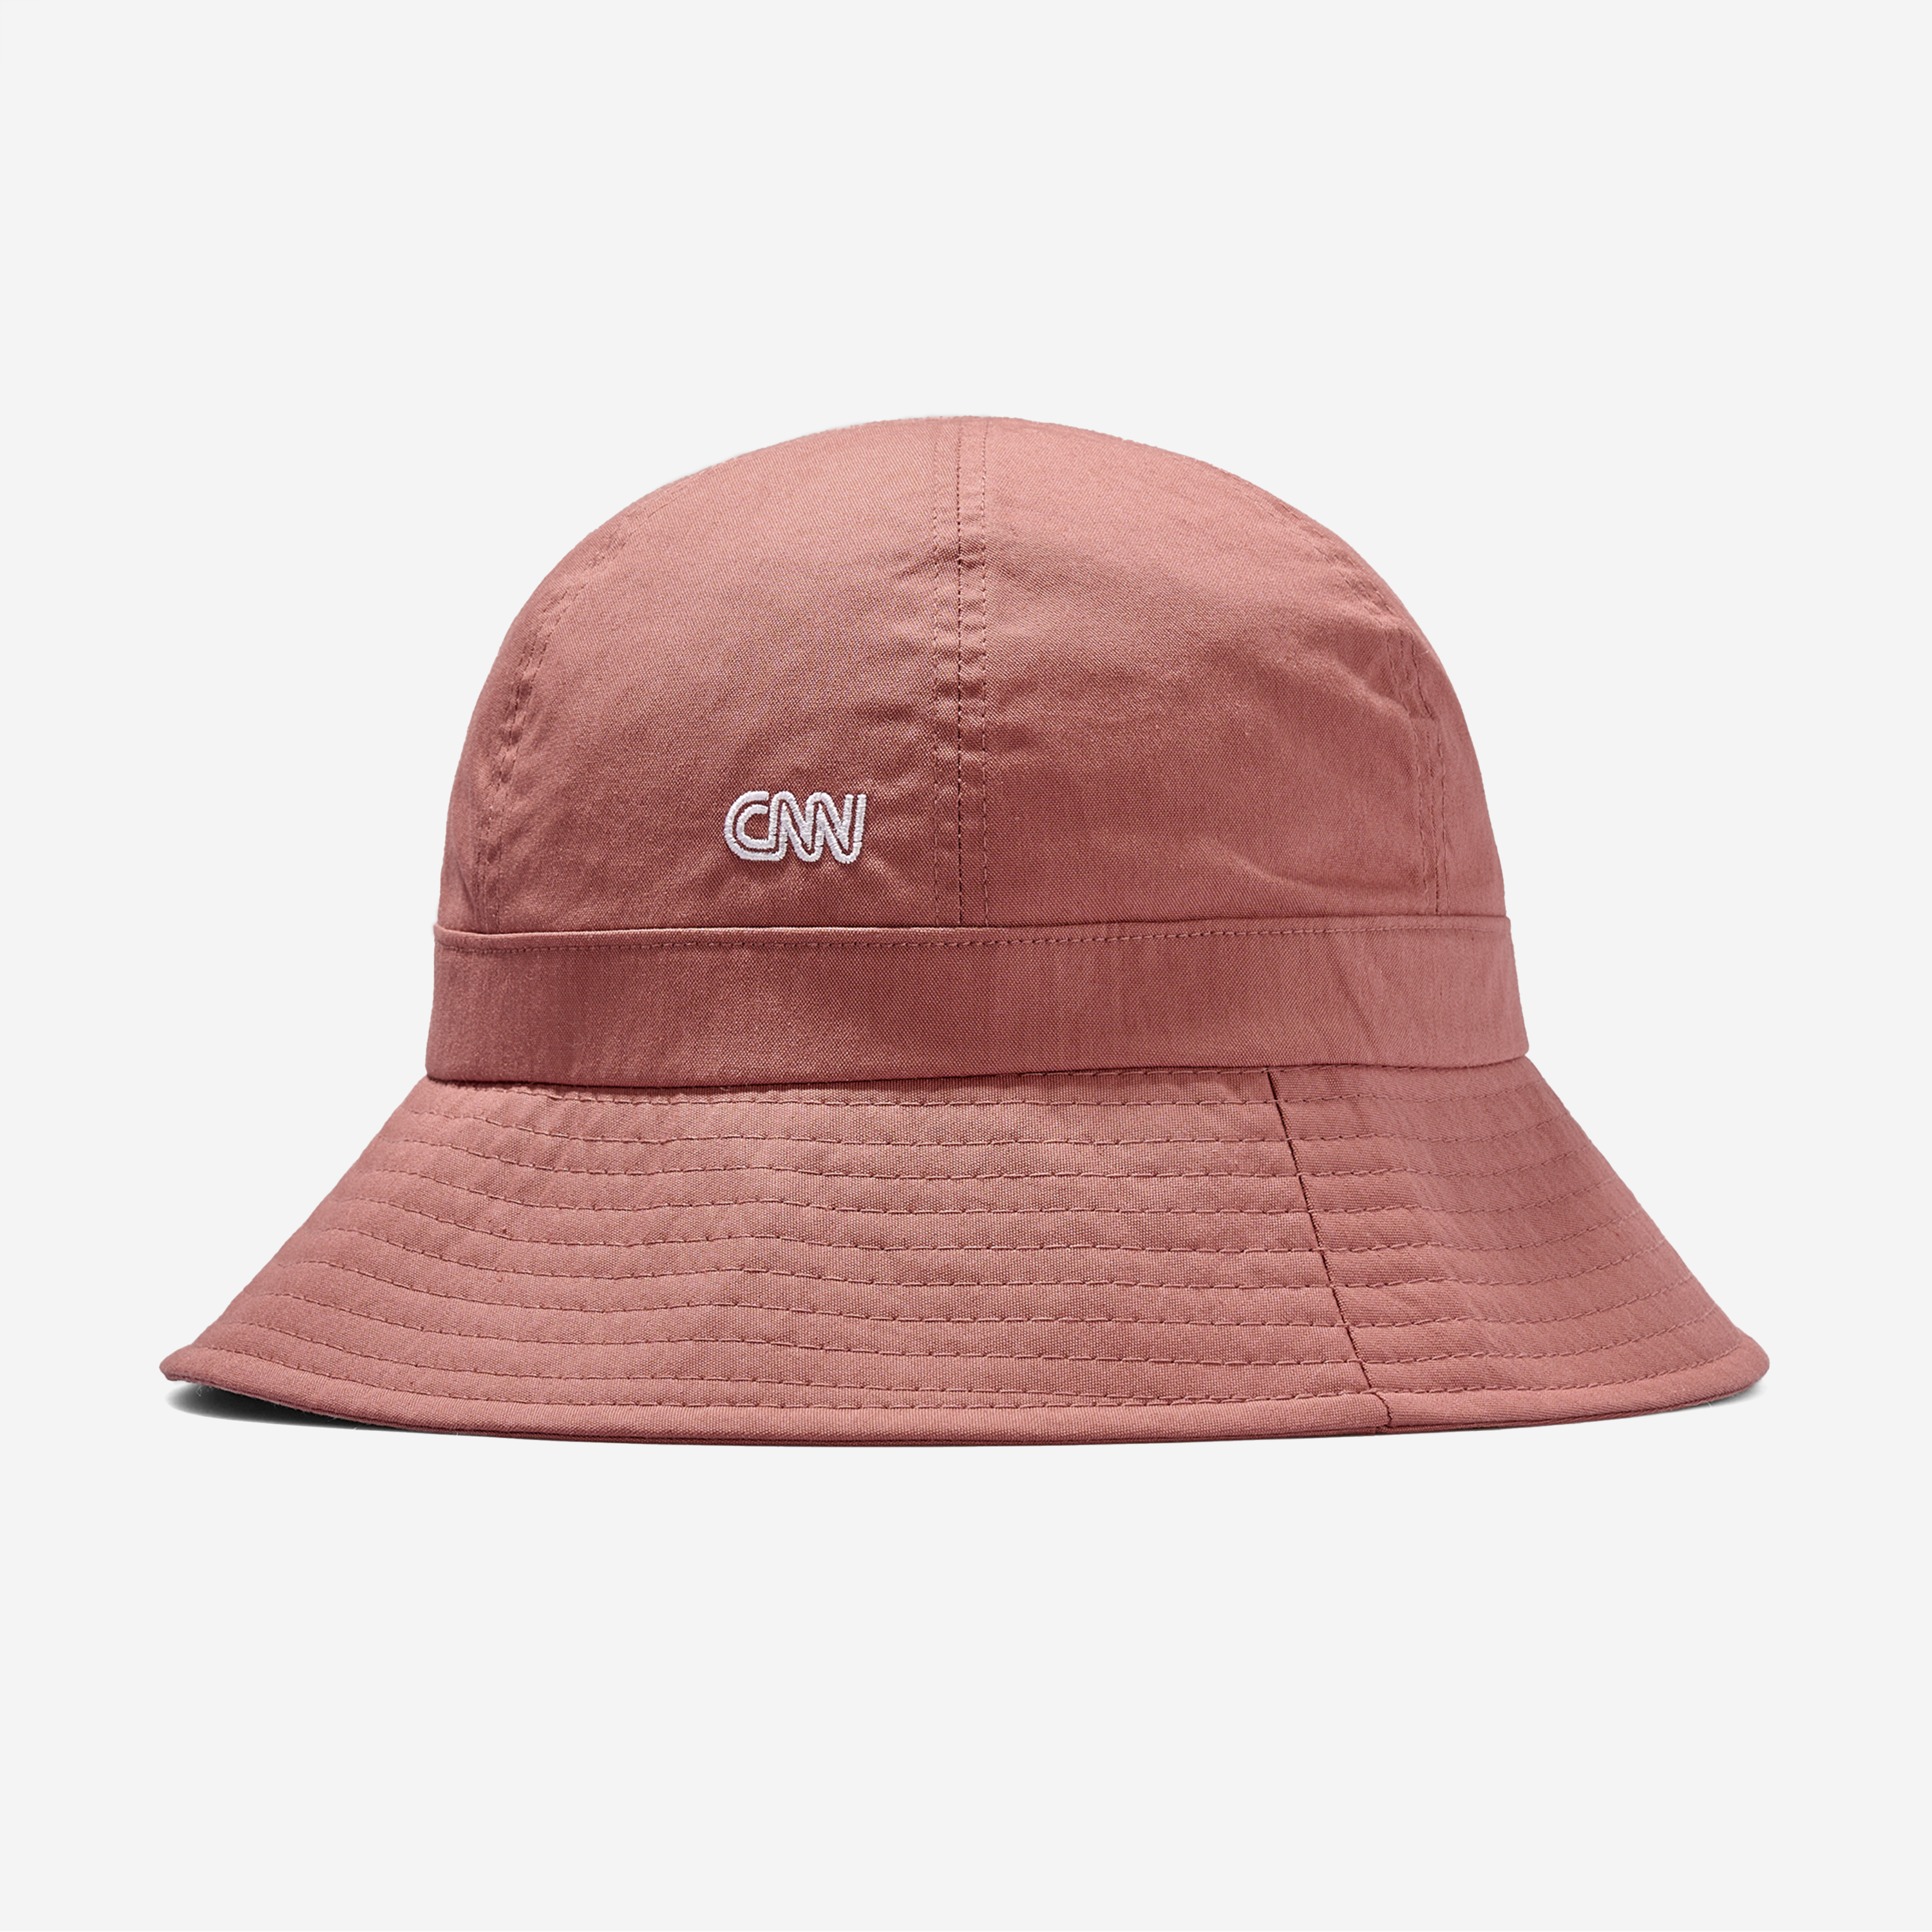 STYLE DOME BUCKET HAT BROWN